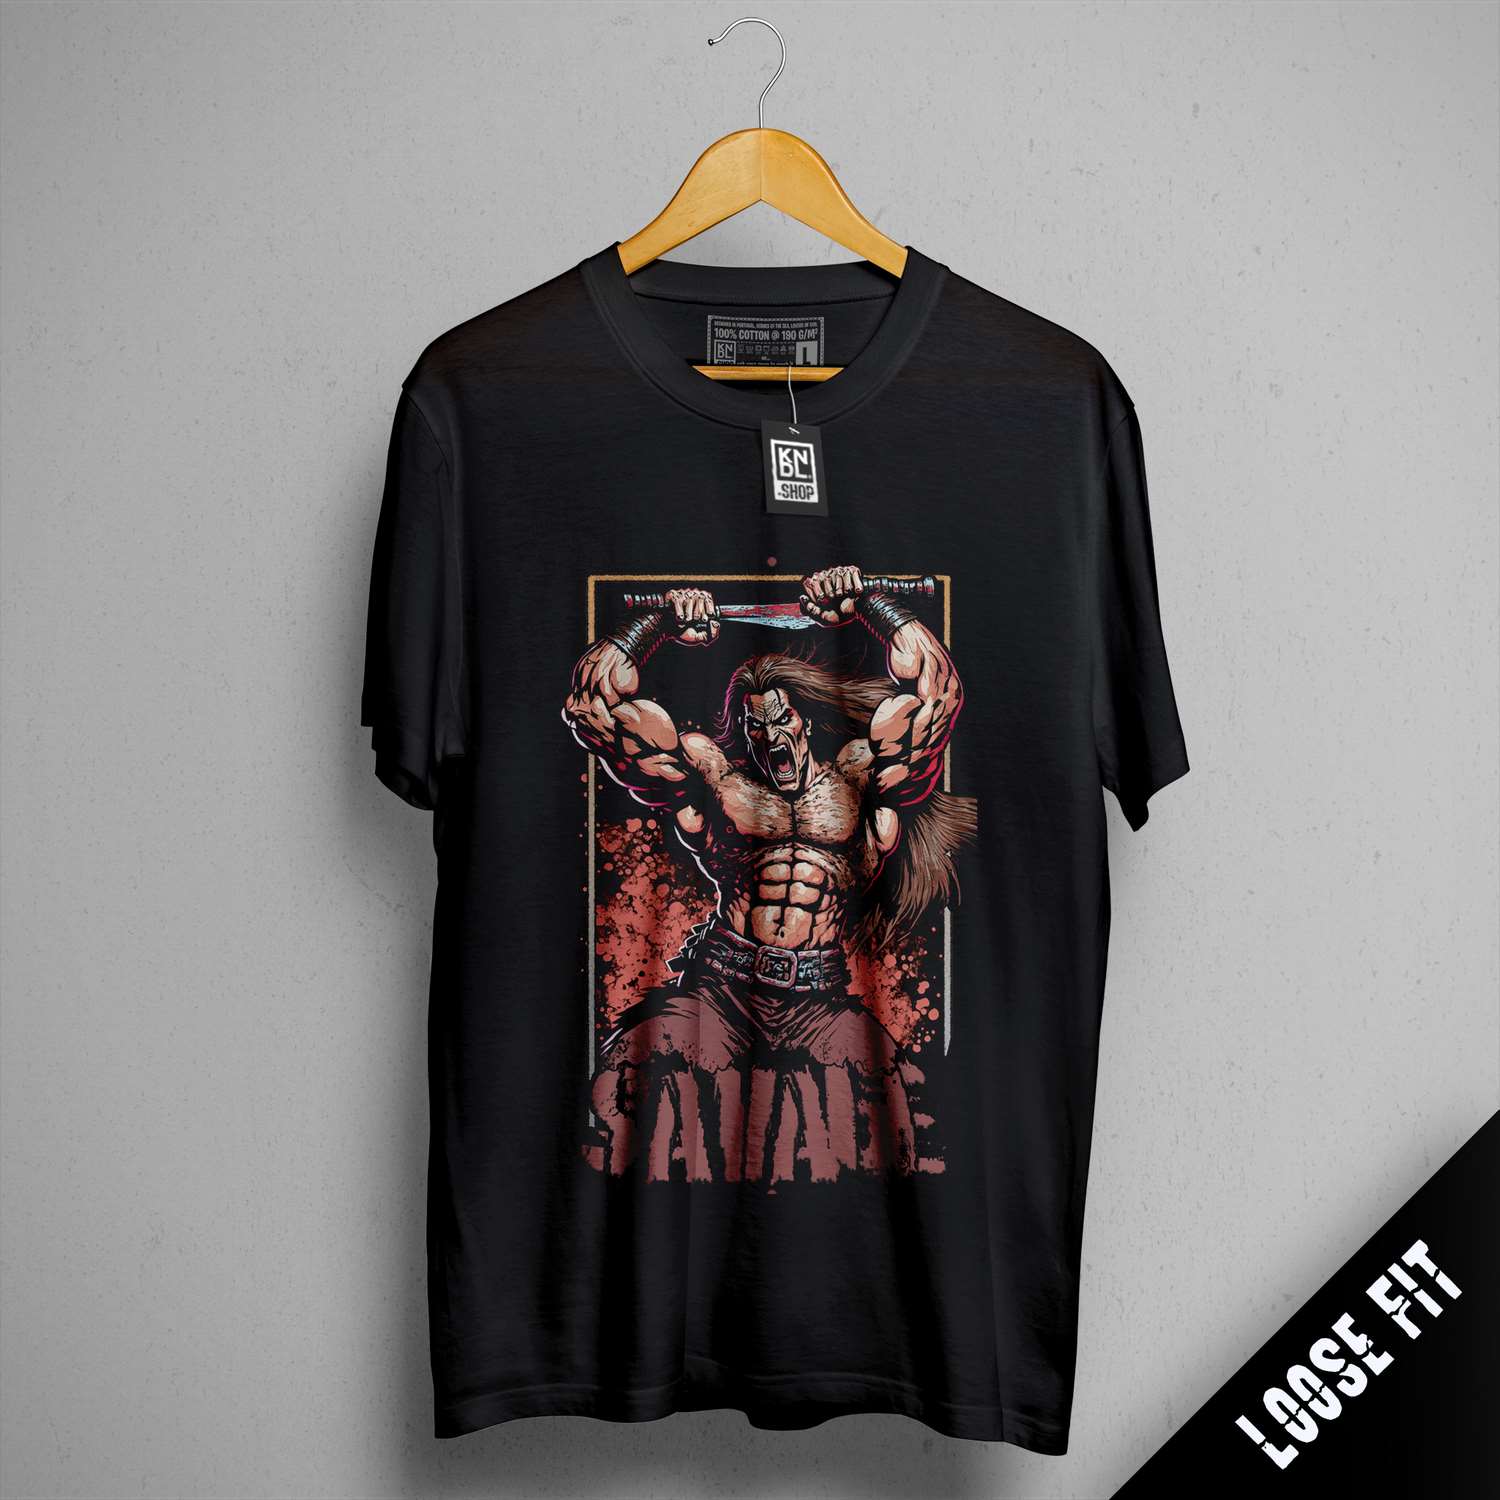 a black shirt with a picture of a wrestler on it